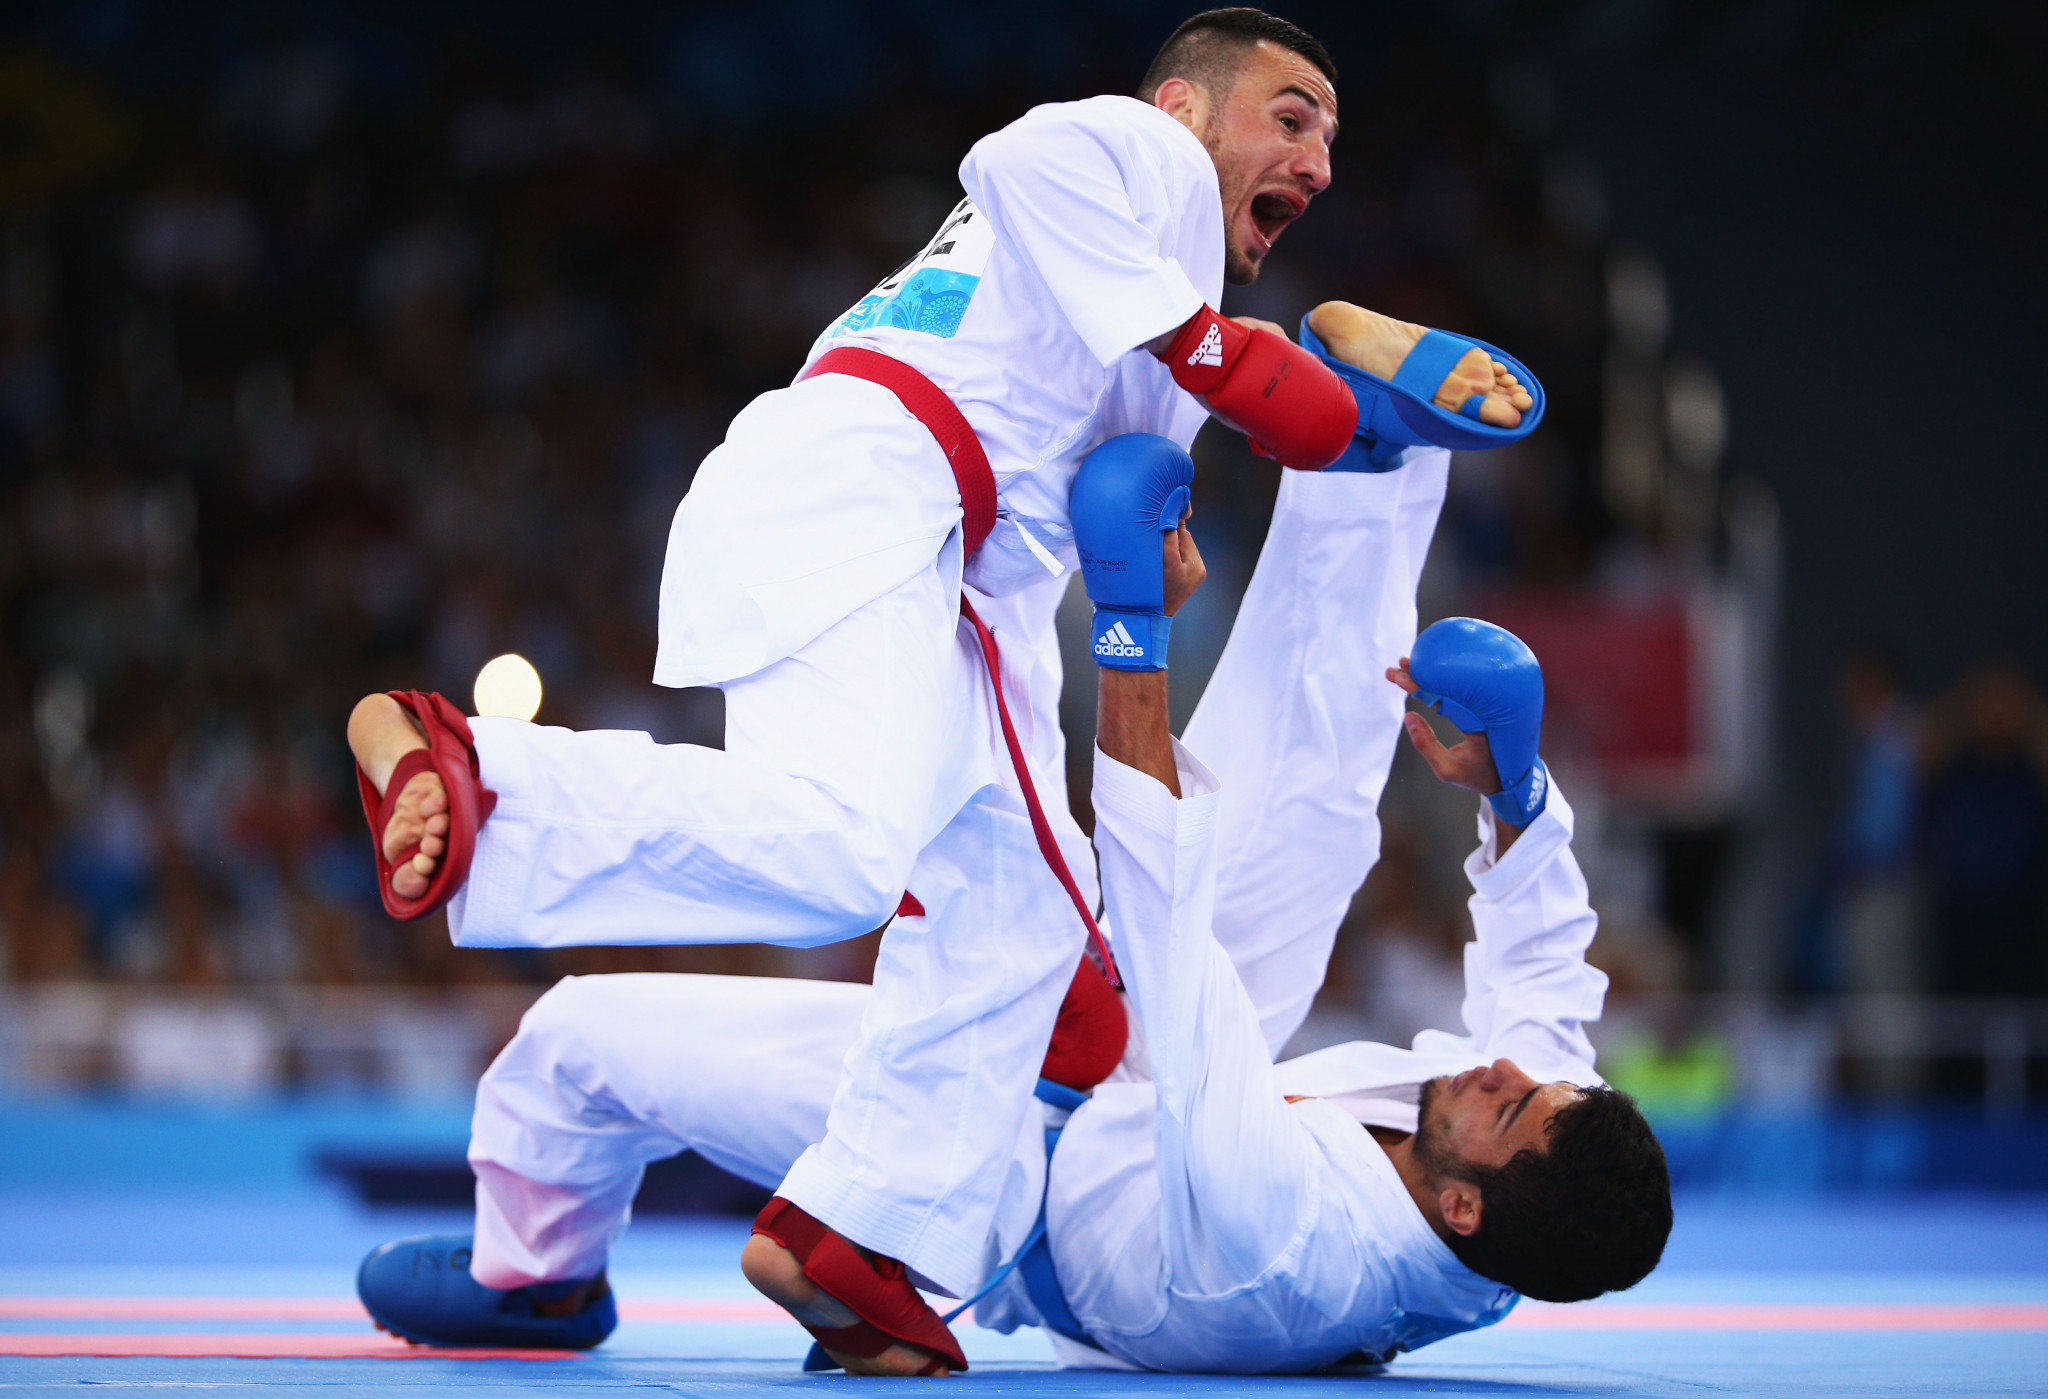 Karate has appeared at both previous editions of the European Games ©Getty Images